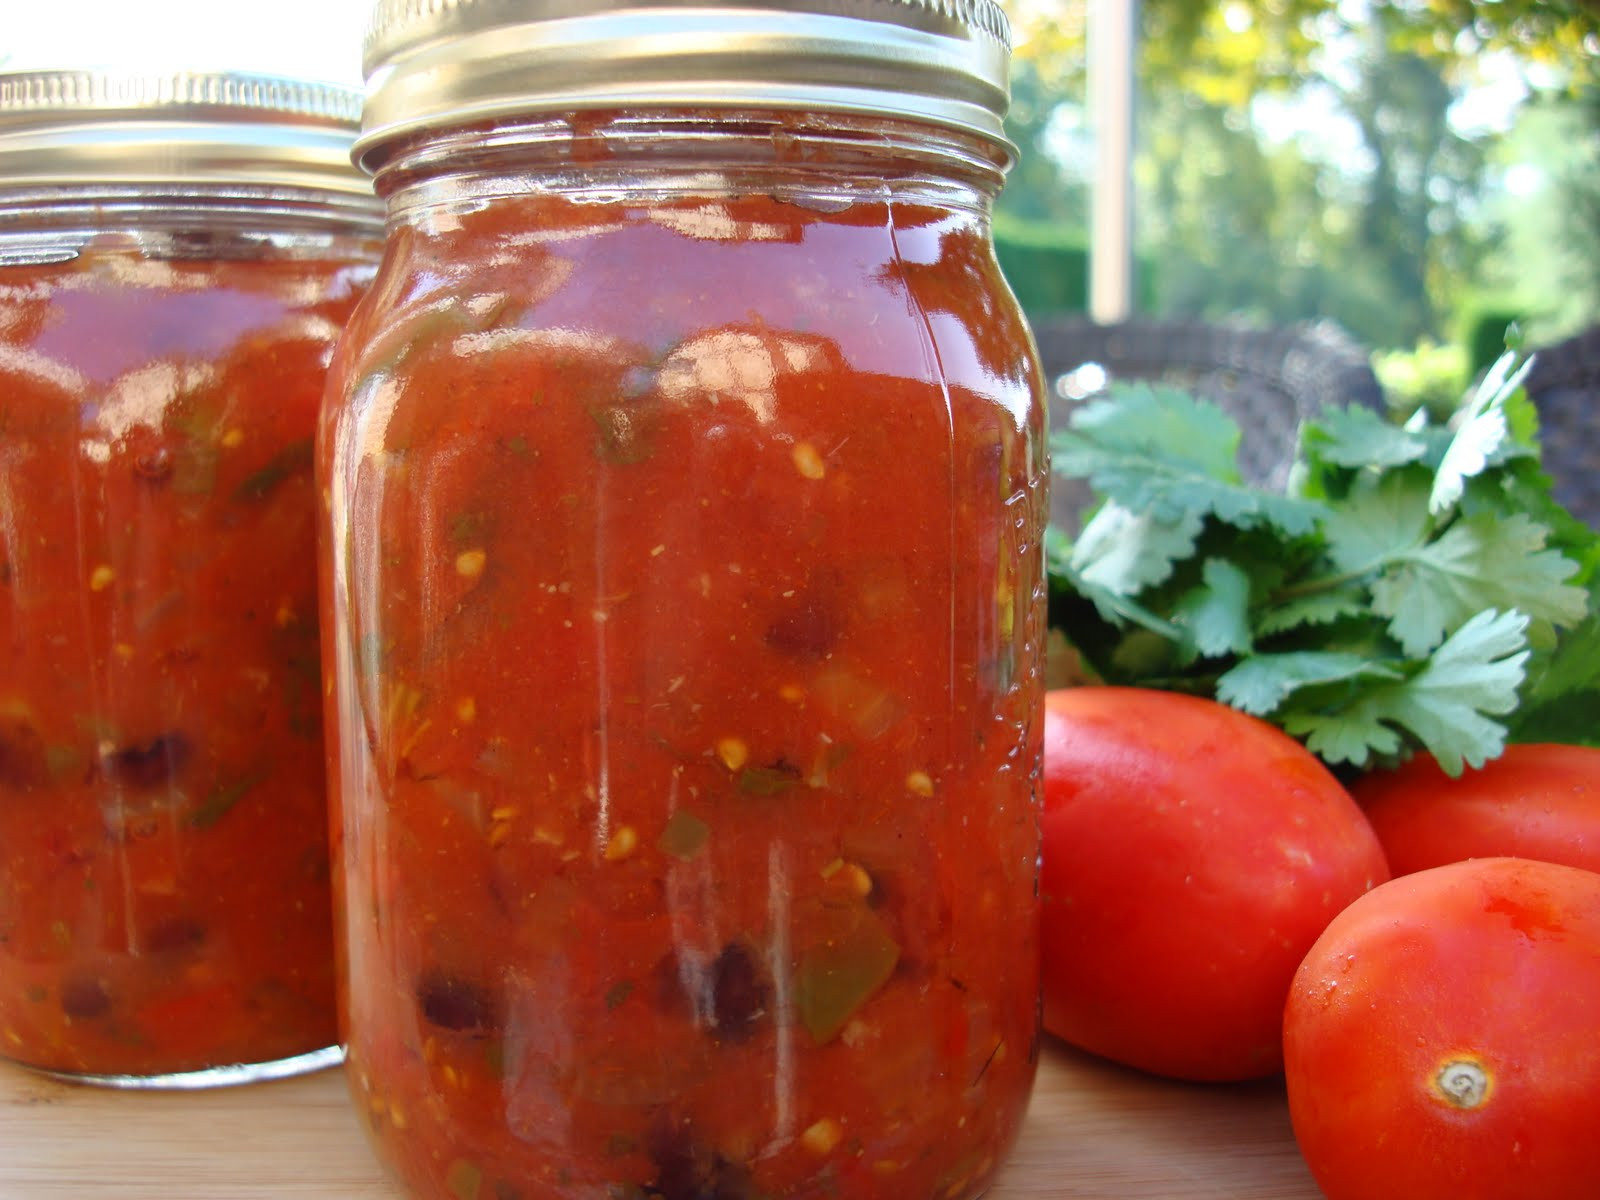 Tomato Salsa Recipe For Canning
 Mennonite Girls Can Cook Canned Tomato Salsa